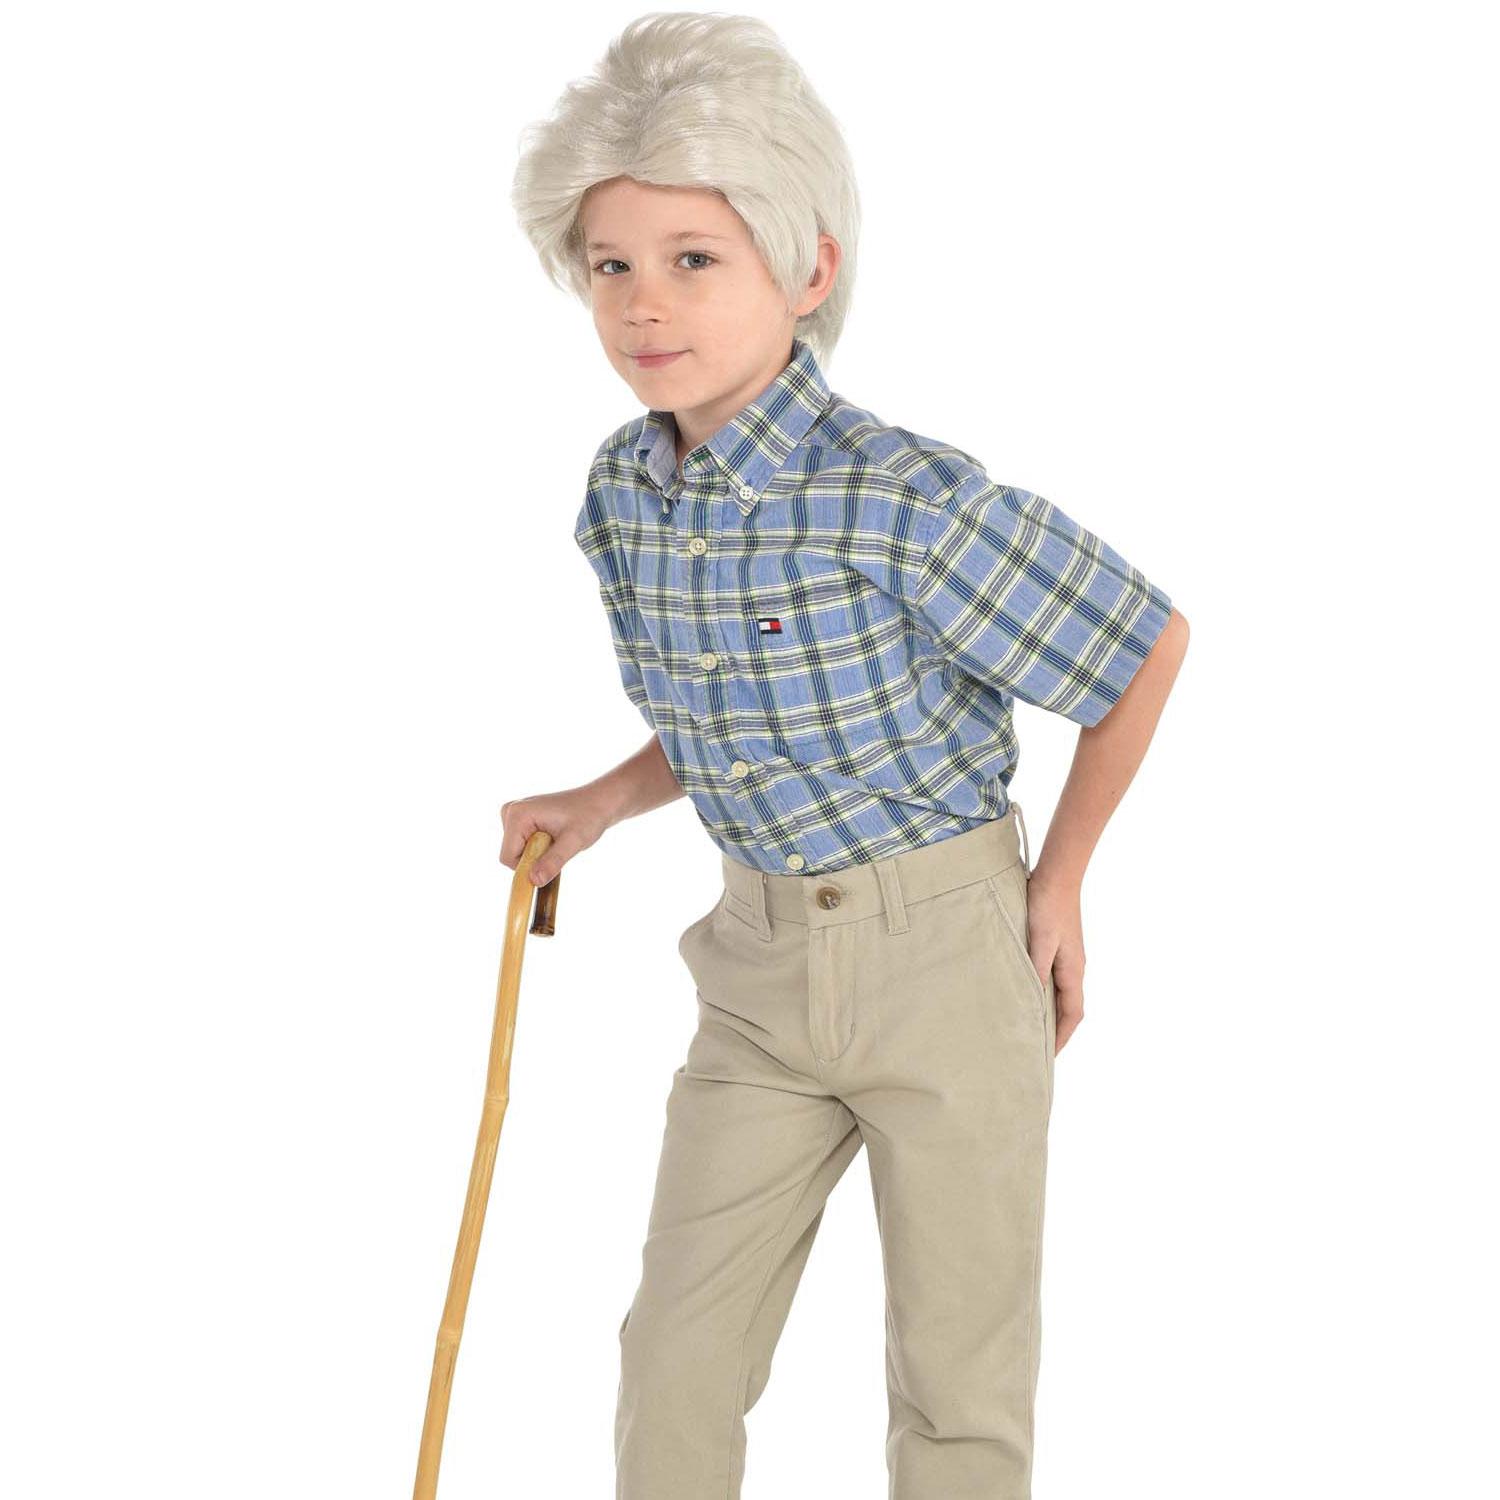 100th Day Of School Old Pops Wig - Child Costumes & Apparel - Party Centre